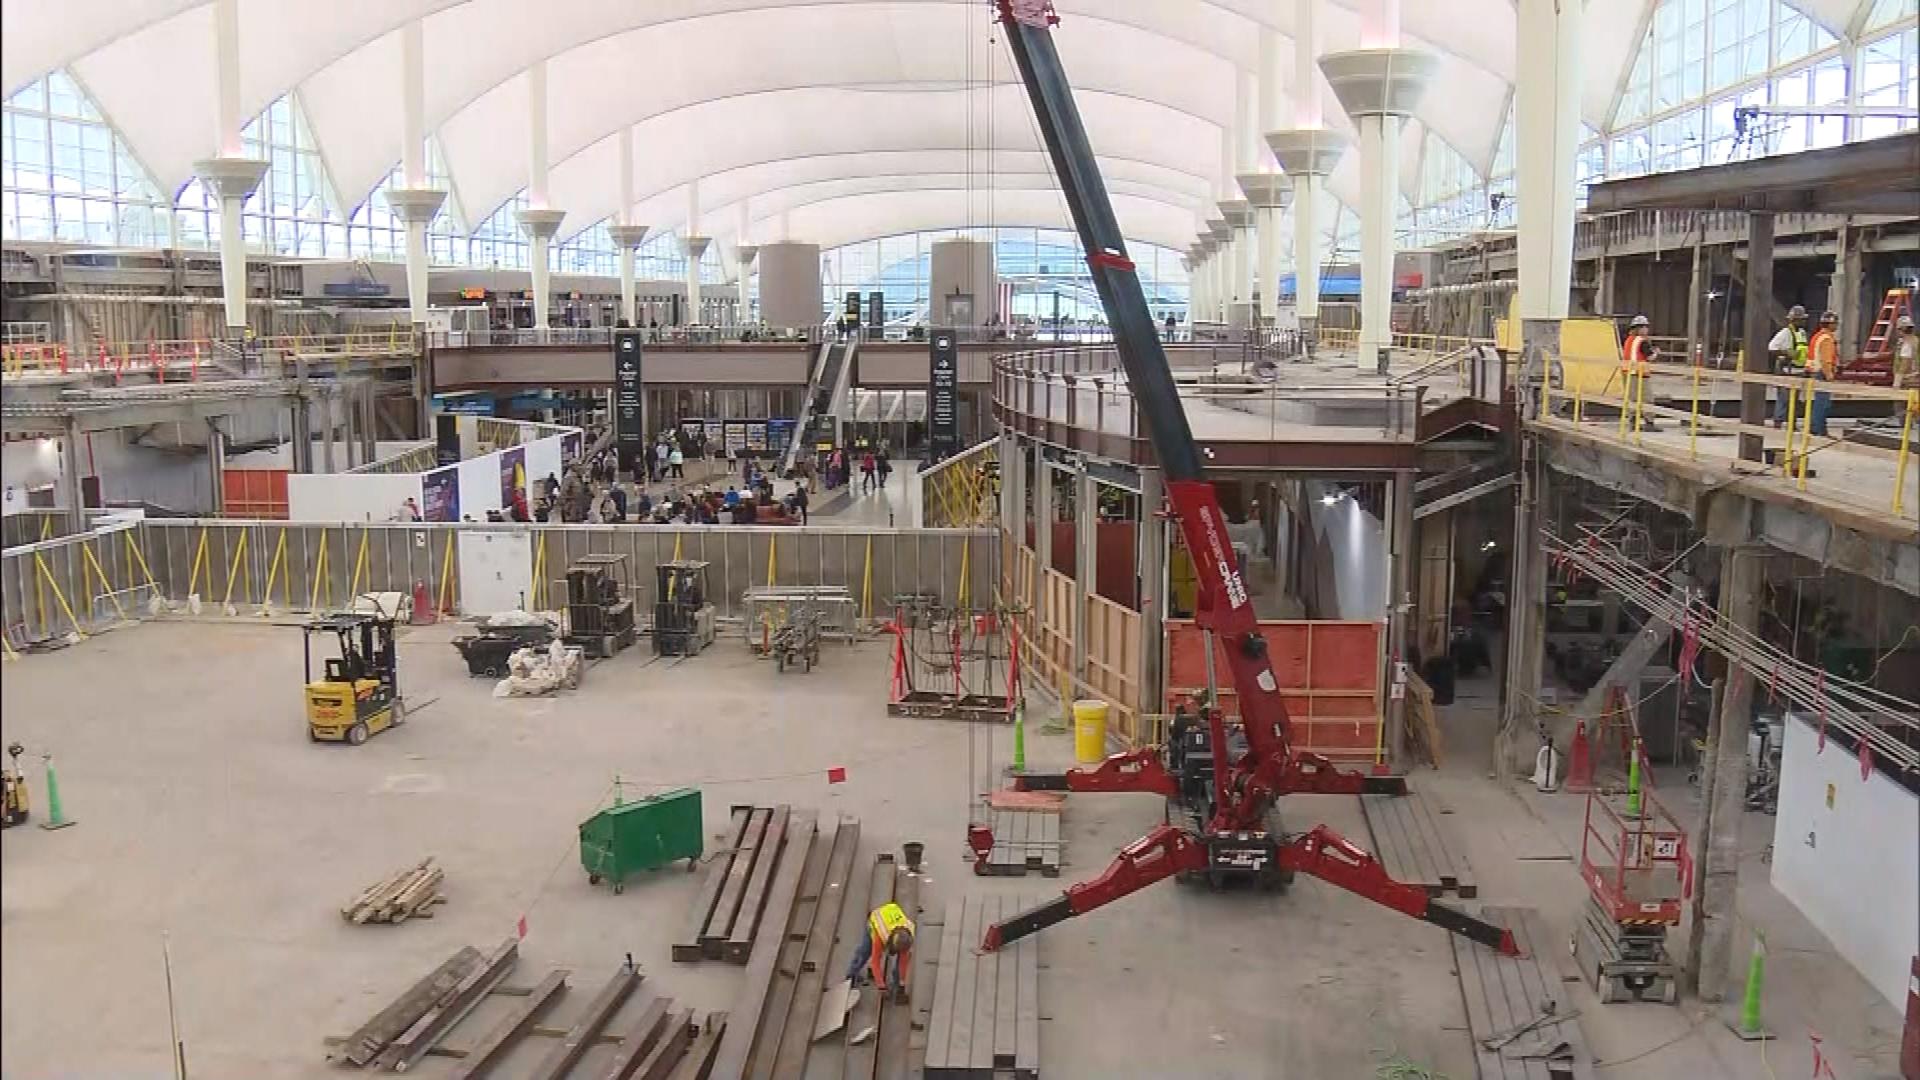 A look at the Great Hall Project under construction at Denver International Airport